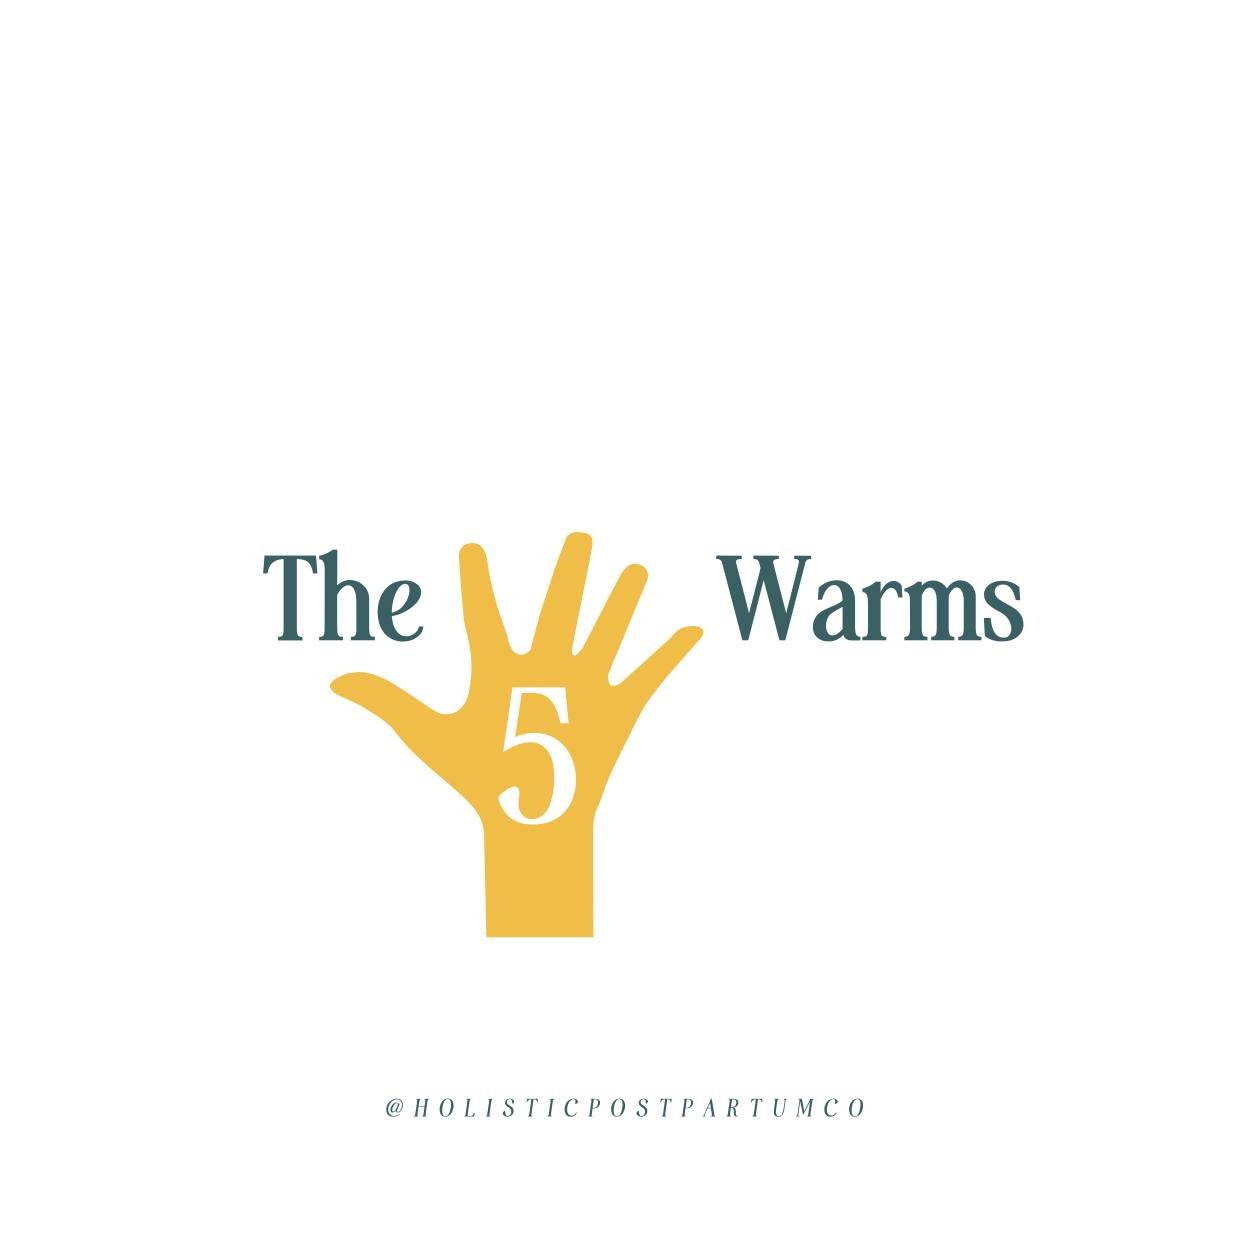 When giving your baby a massage, remember the 5 Warms:

&zwnj;

🌡️Warm Room - Make sure the room is nice and warm and free of drafts to keep your baby warm and happy. Use a space heater if necessary.
🍵Warm Oil - Warm up your oil of choice in a cont